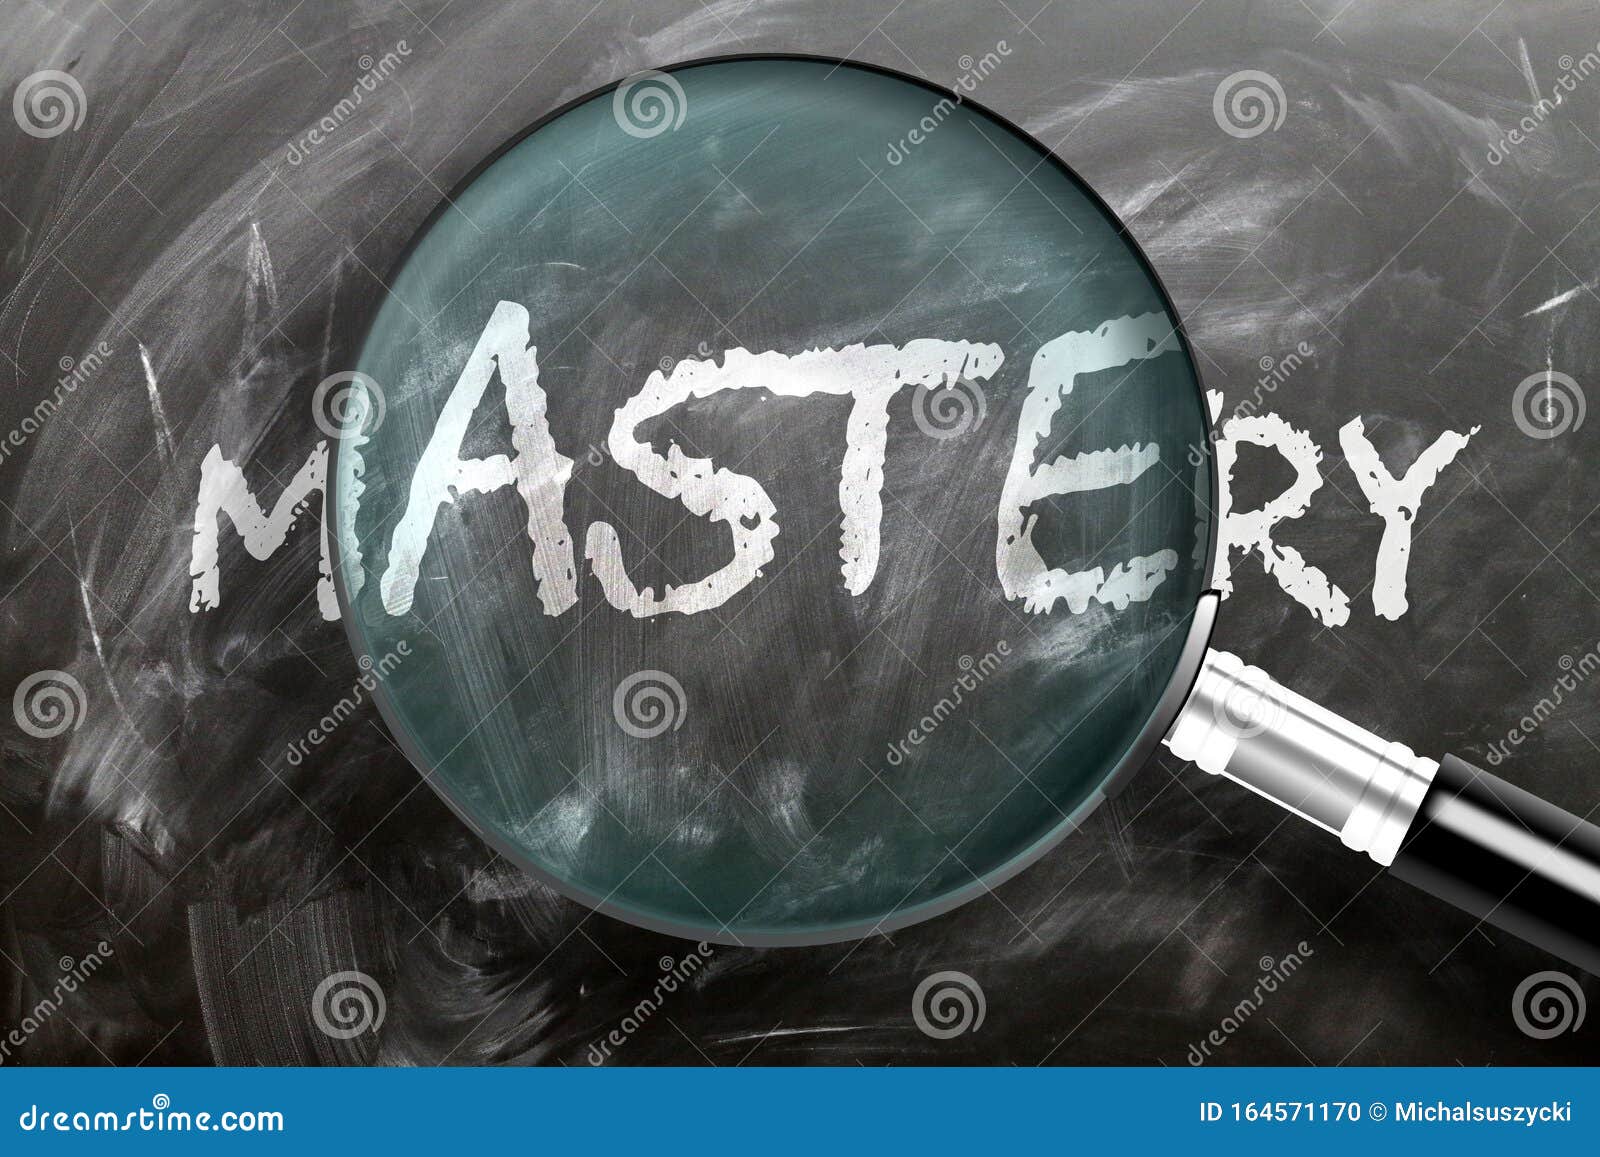 learn, study and inspect mastery - pictured as a magnifying glass enlarging word mastery, izes researching, exploring and